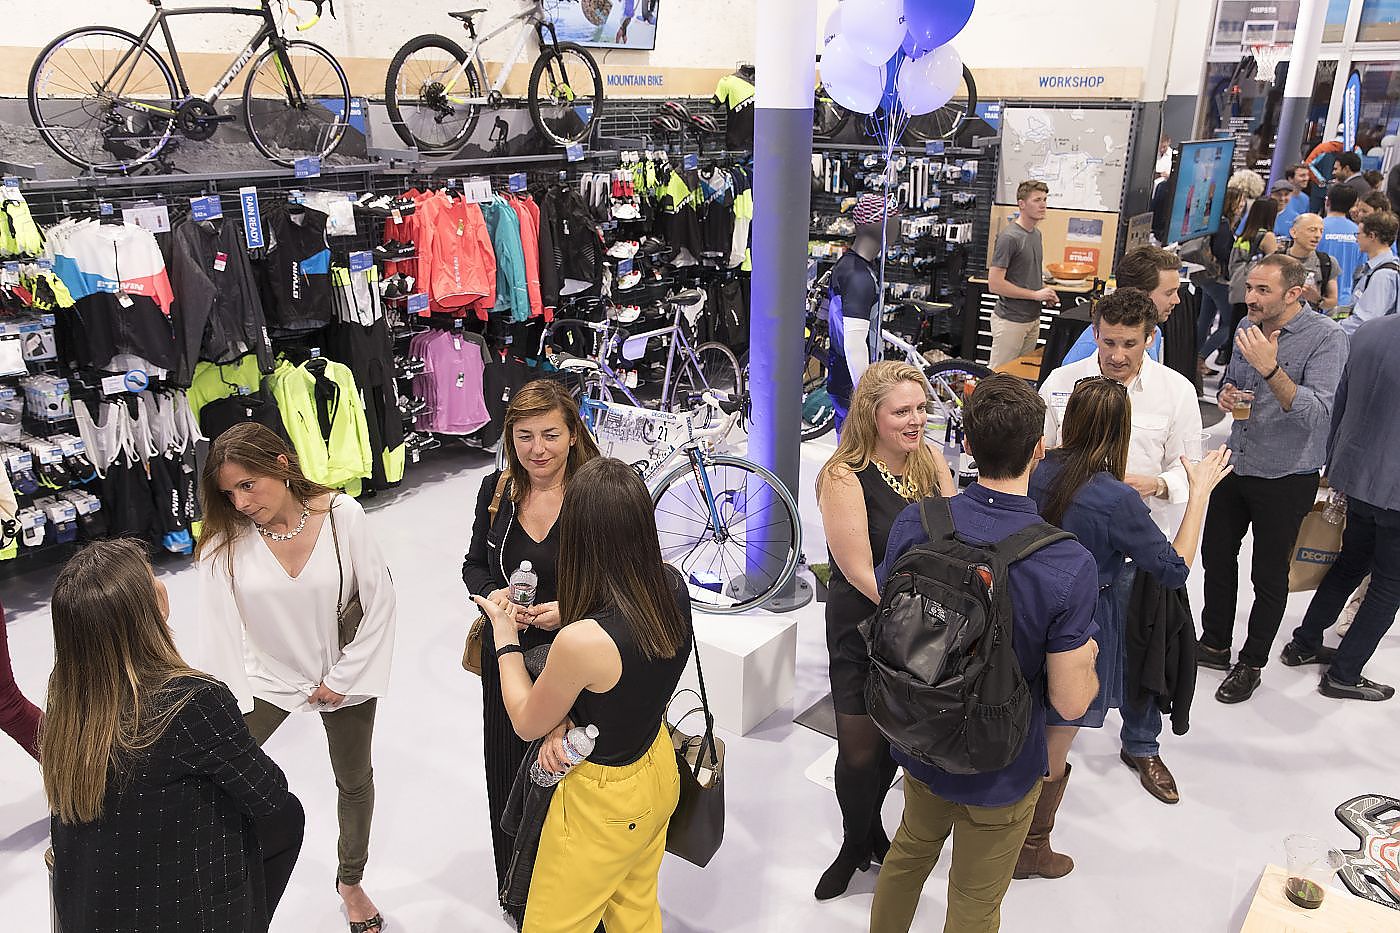 Decathlon: World's Largest Sporting Goods Store Finally Launches in US